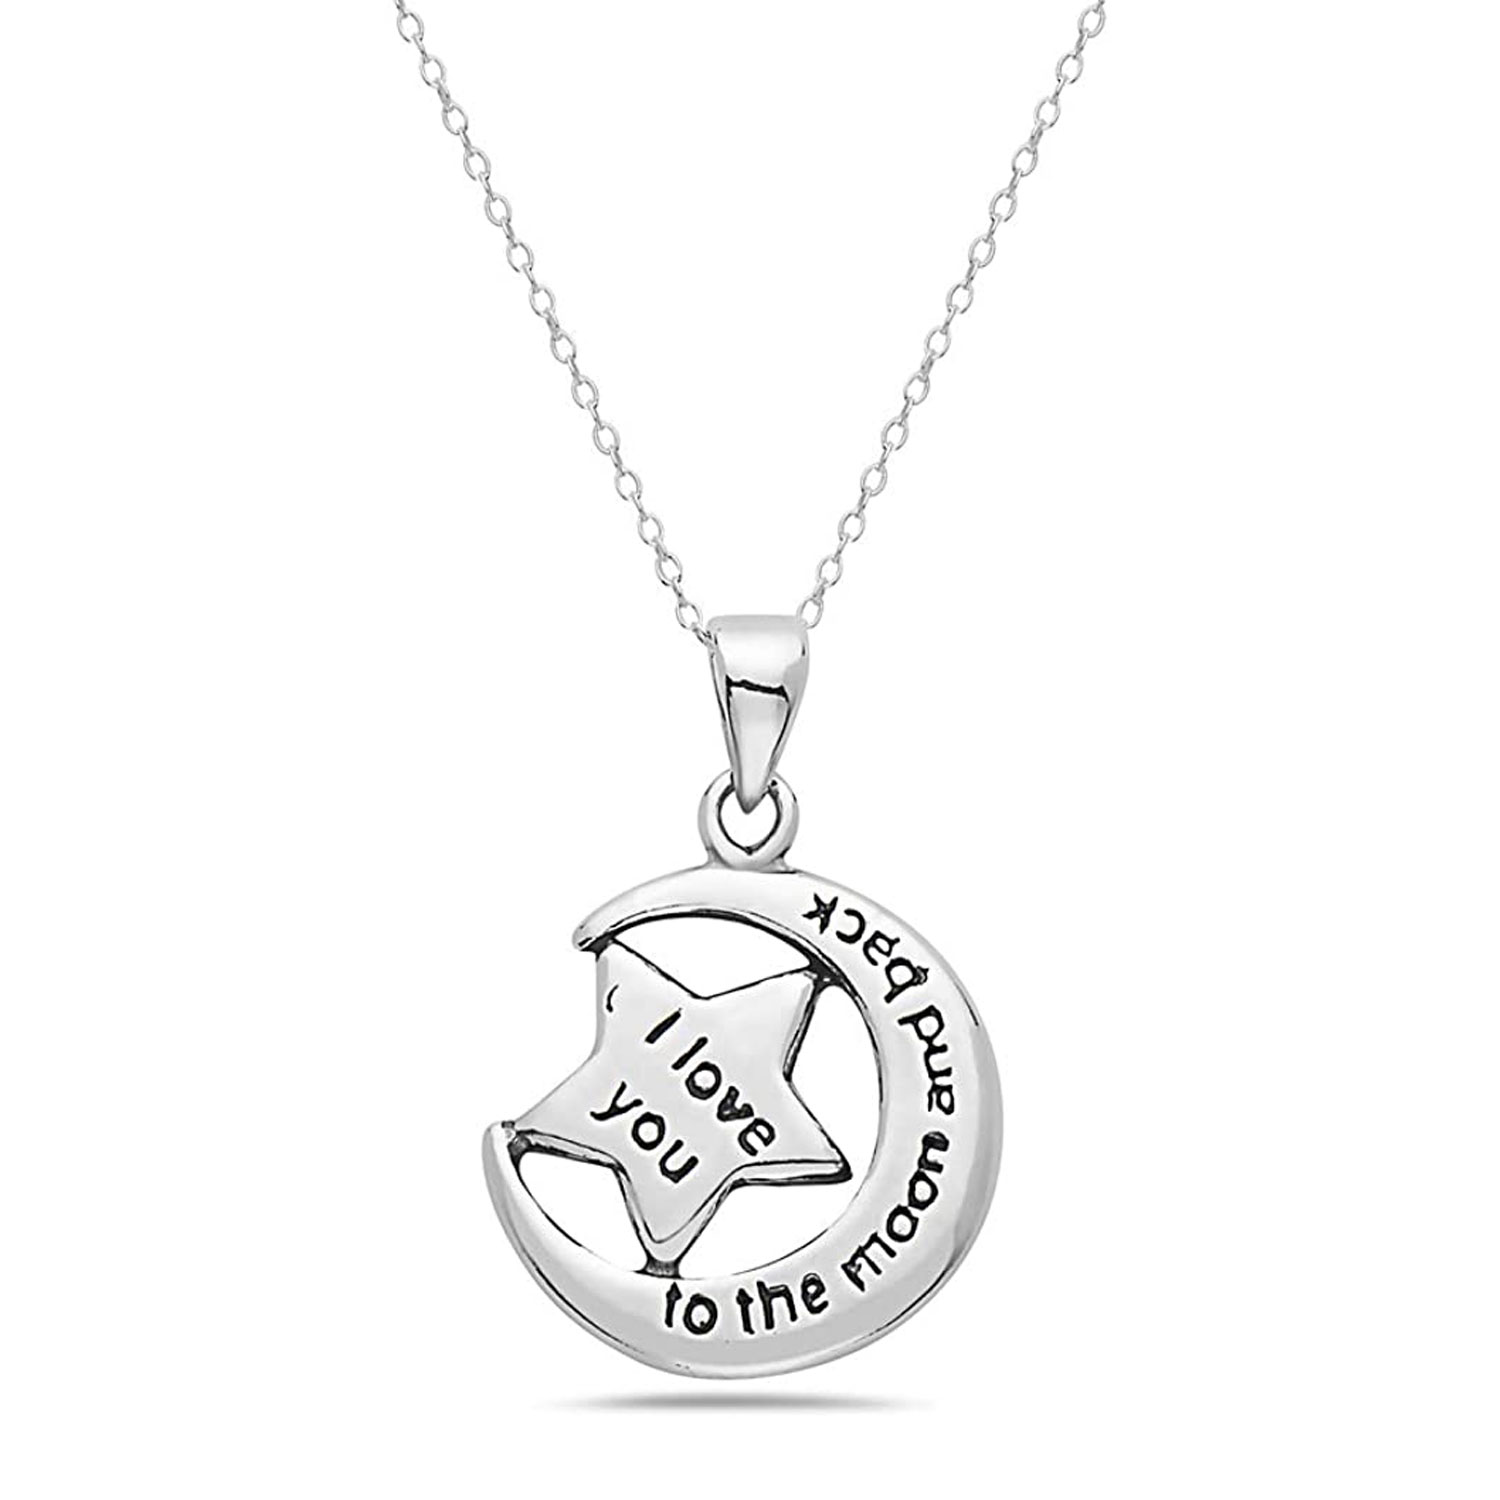 Sterling Silver I Love You Inspirational Quote Pendant Necklace